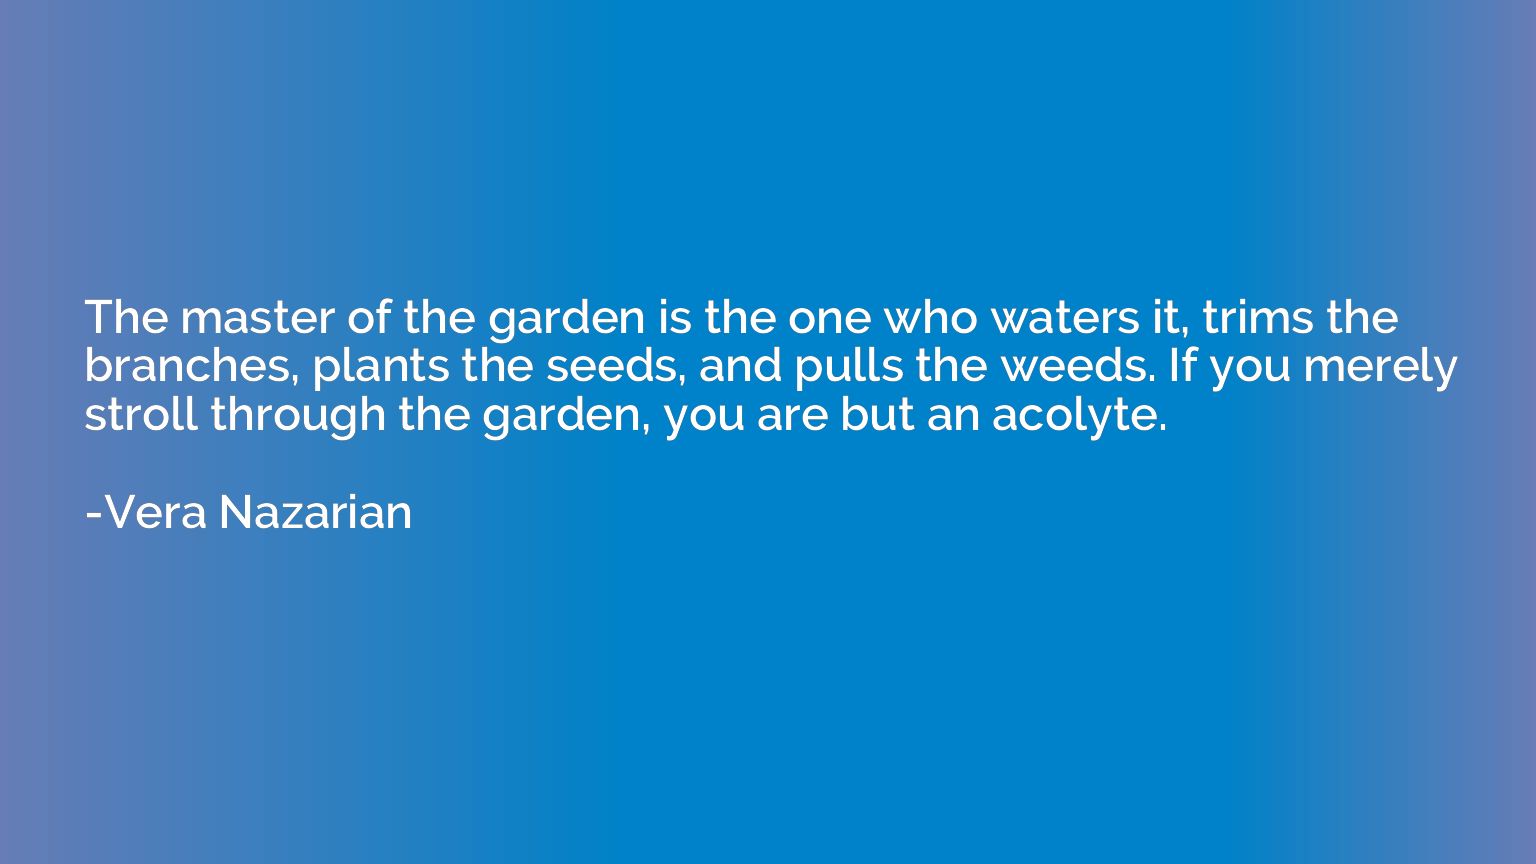 The master of the garden is the one who waters it, trims the